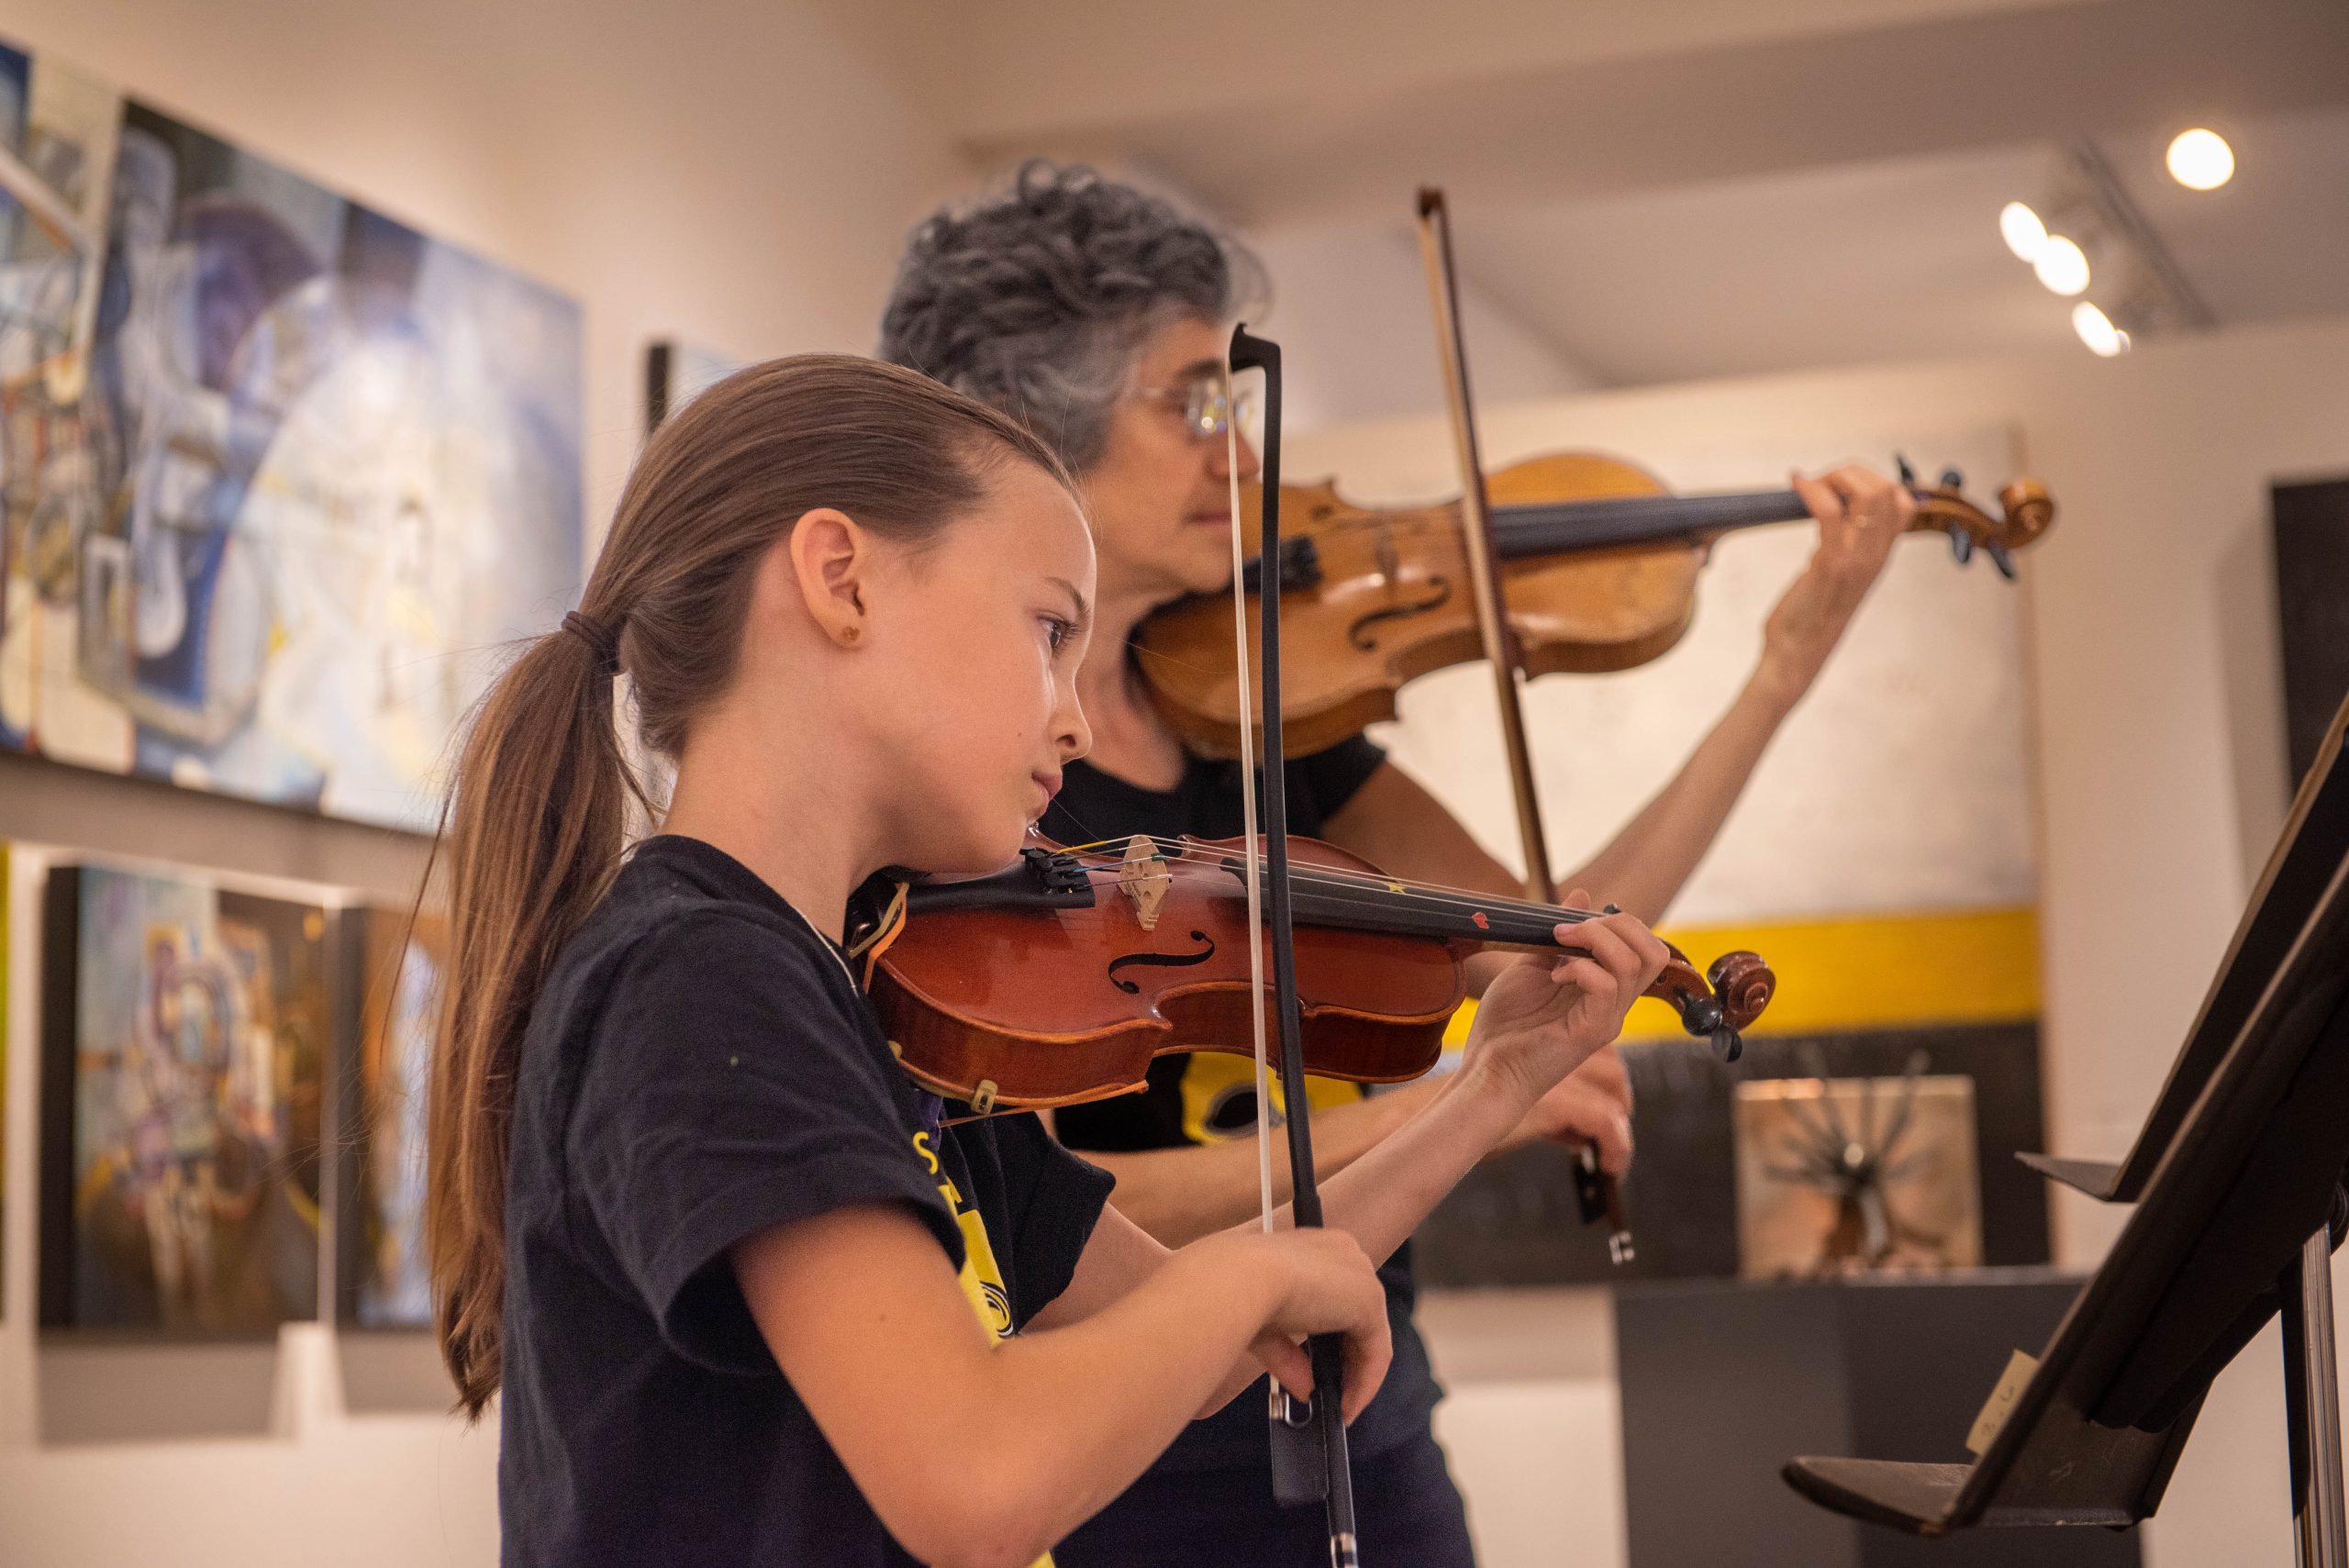 In an art gallery, two people are playing the violin. The younger one is in the foreground with long brown hair and a black T-shirt, looking at a sheet of music. The older person has salt and pepper short hair and glasses and is also wearing black.